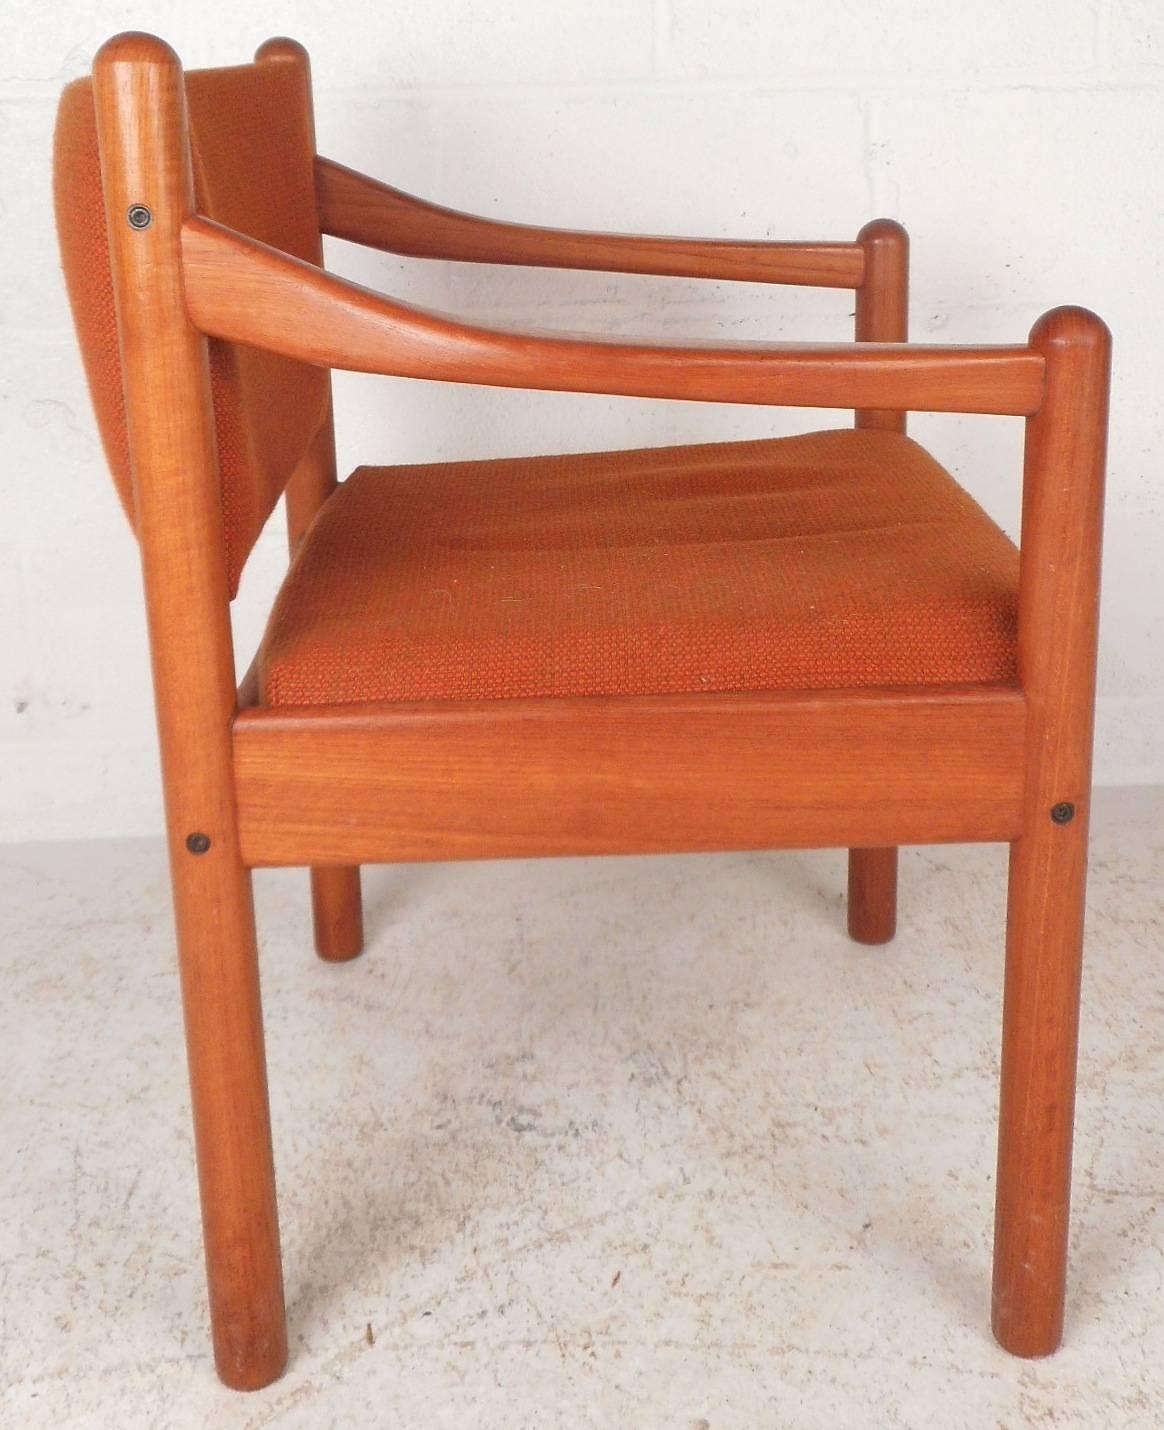 This beautiful vintage modern side chair features plush bright orange upholstery on the seat and backrest. Unique sculpted arm rests and cylindrical legs add to the allure. Extremely comfortable seating with elegant teak wood grain makes the perfect